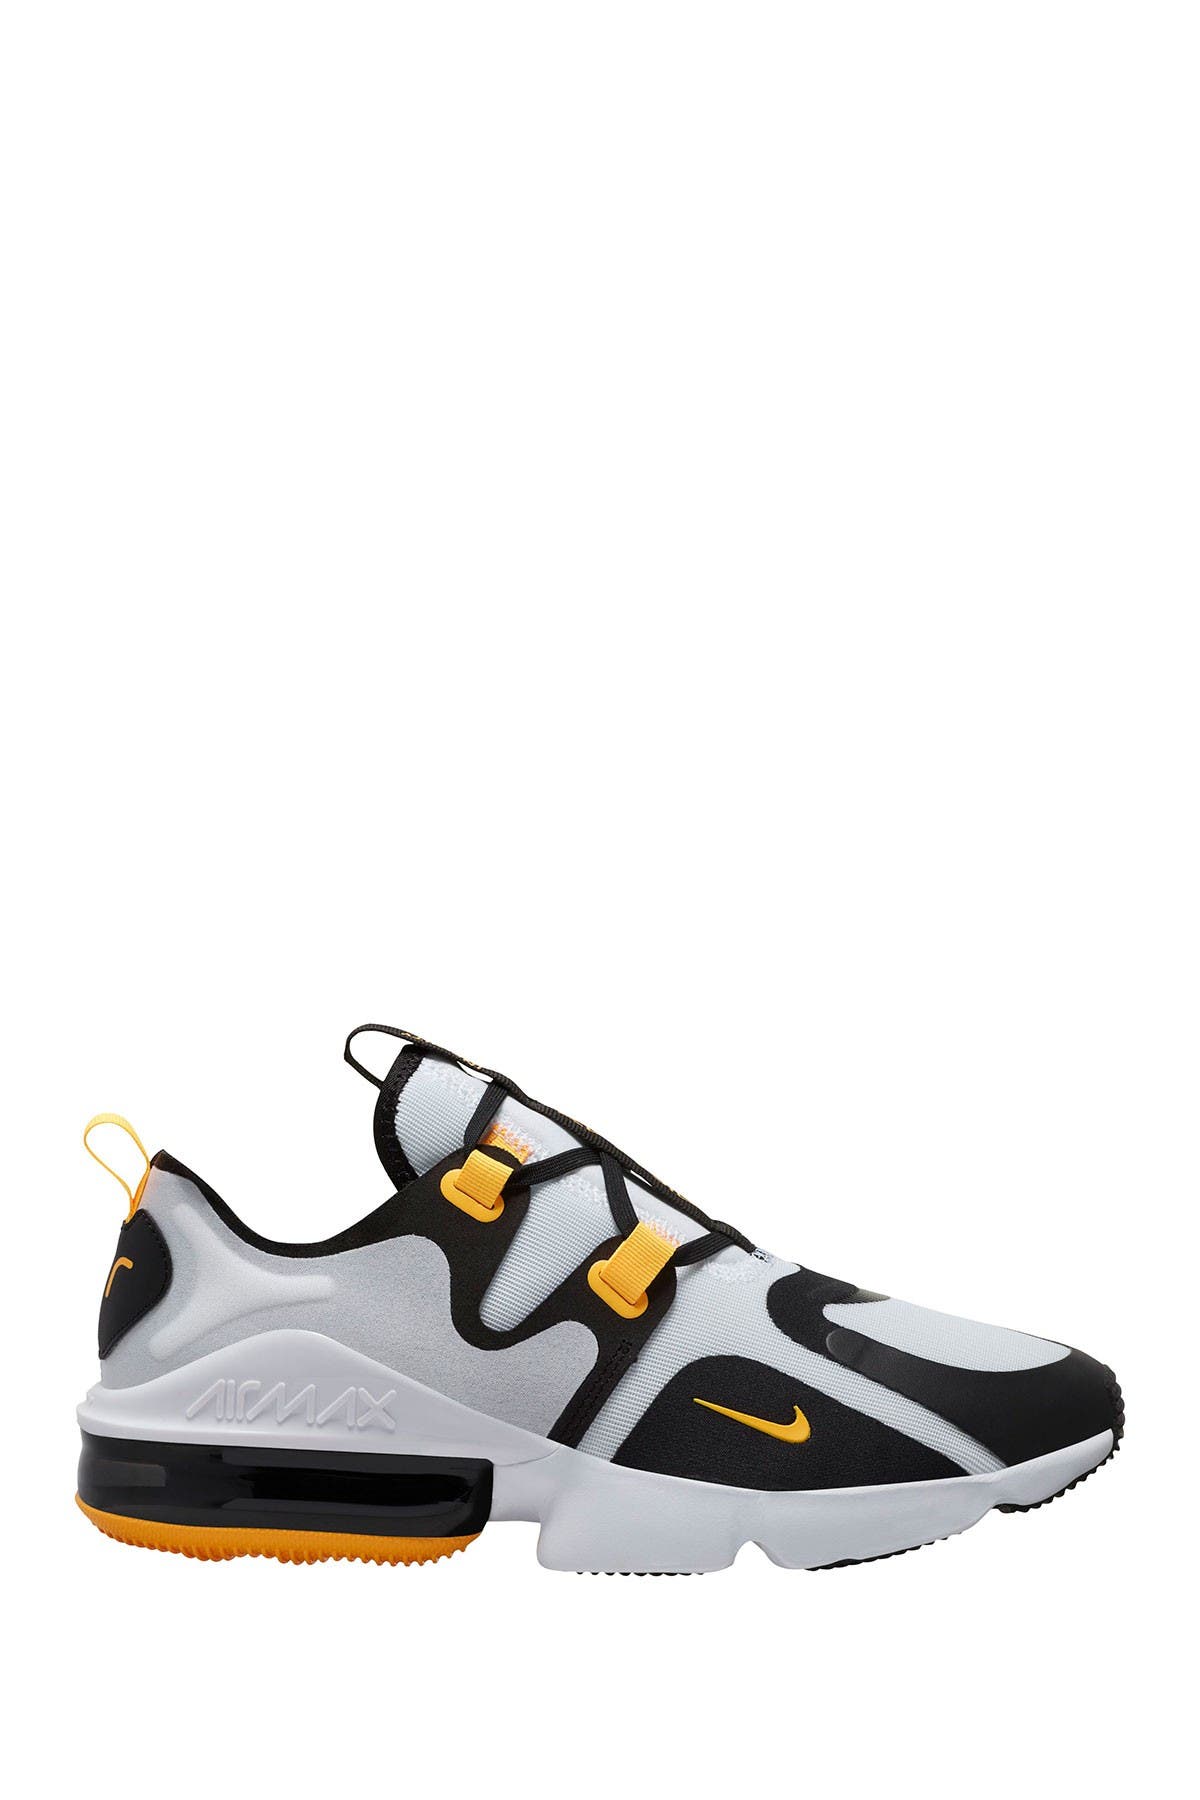 nike air max infinity price shoes